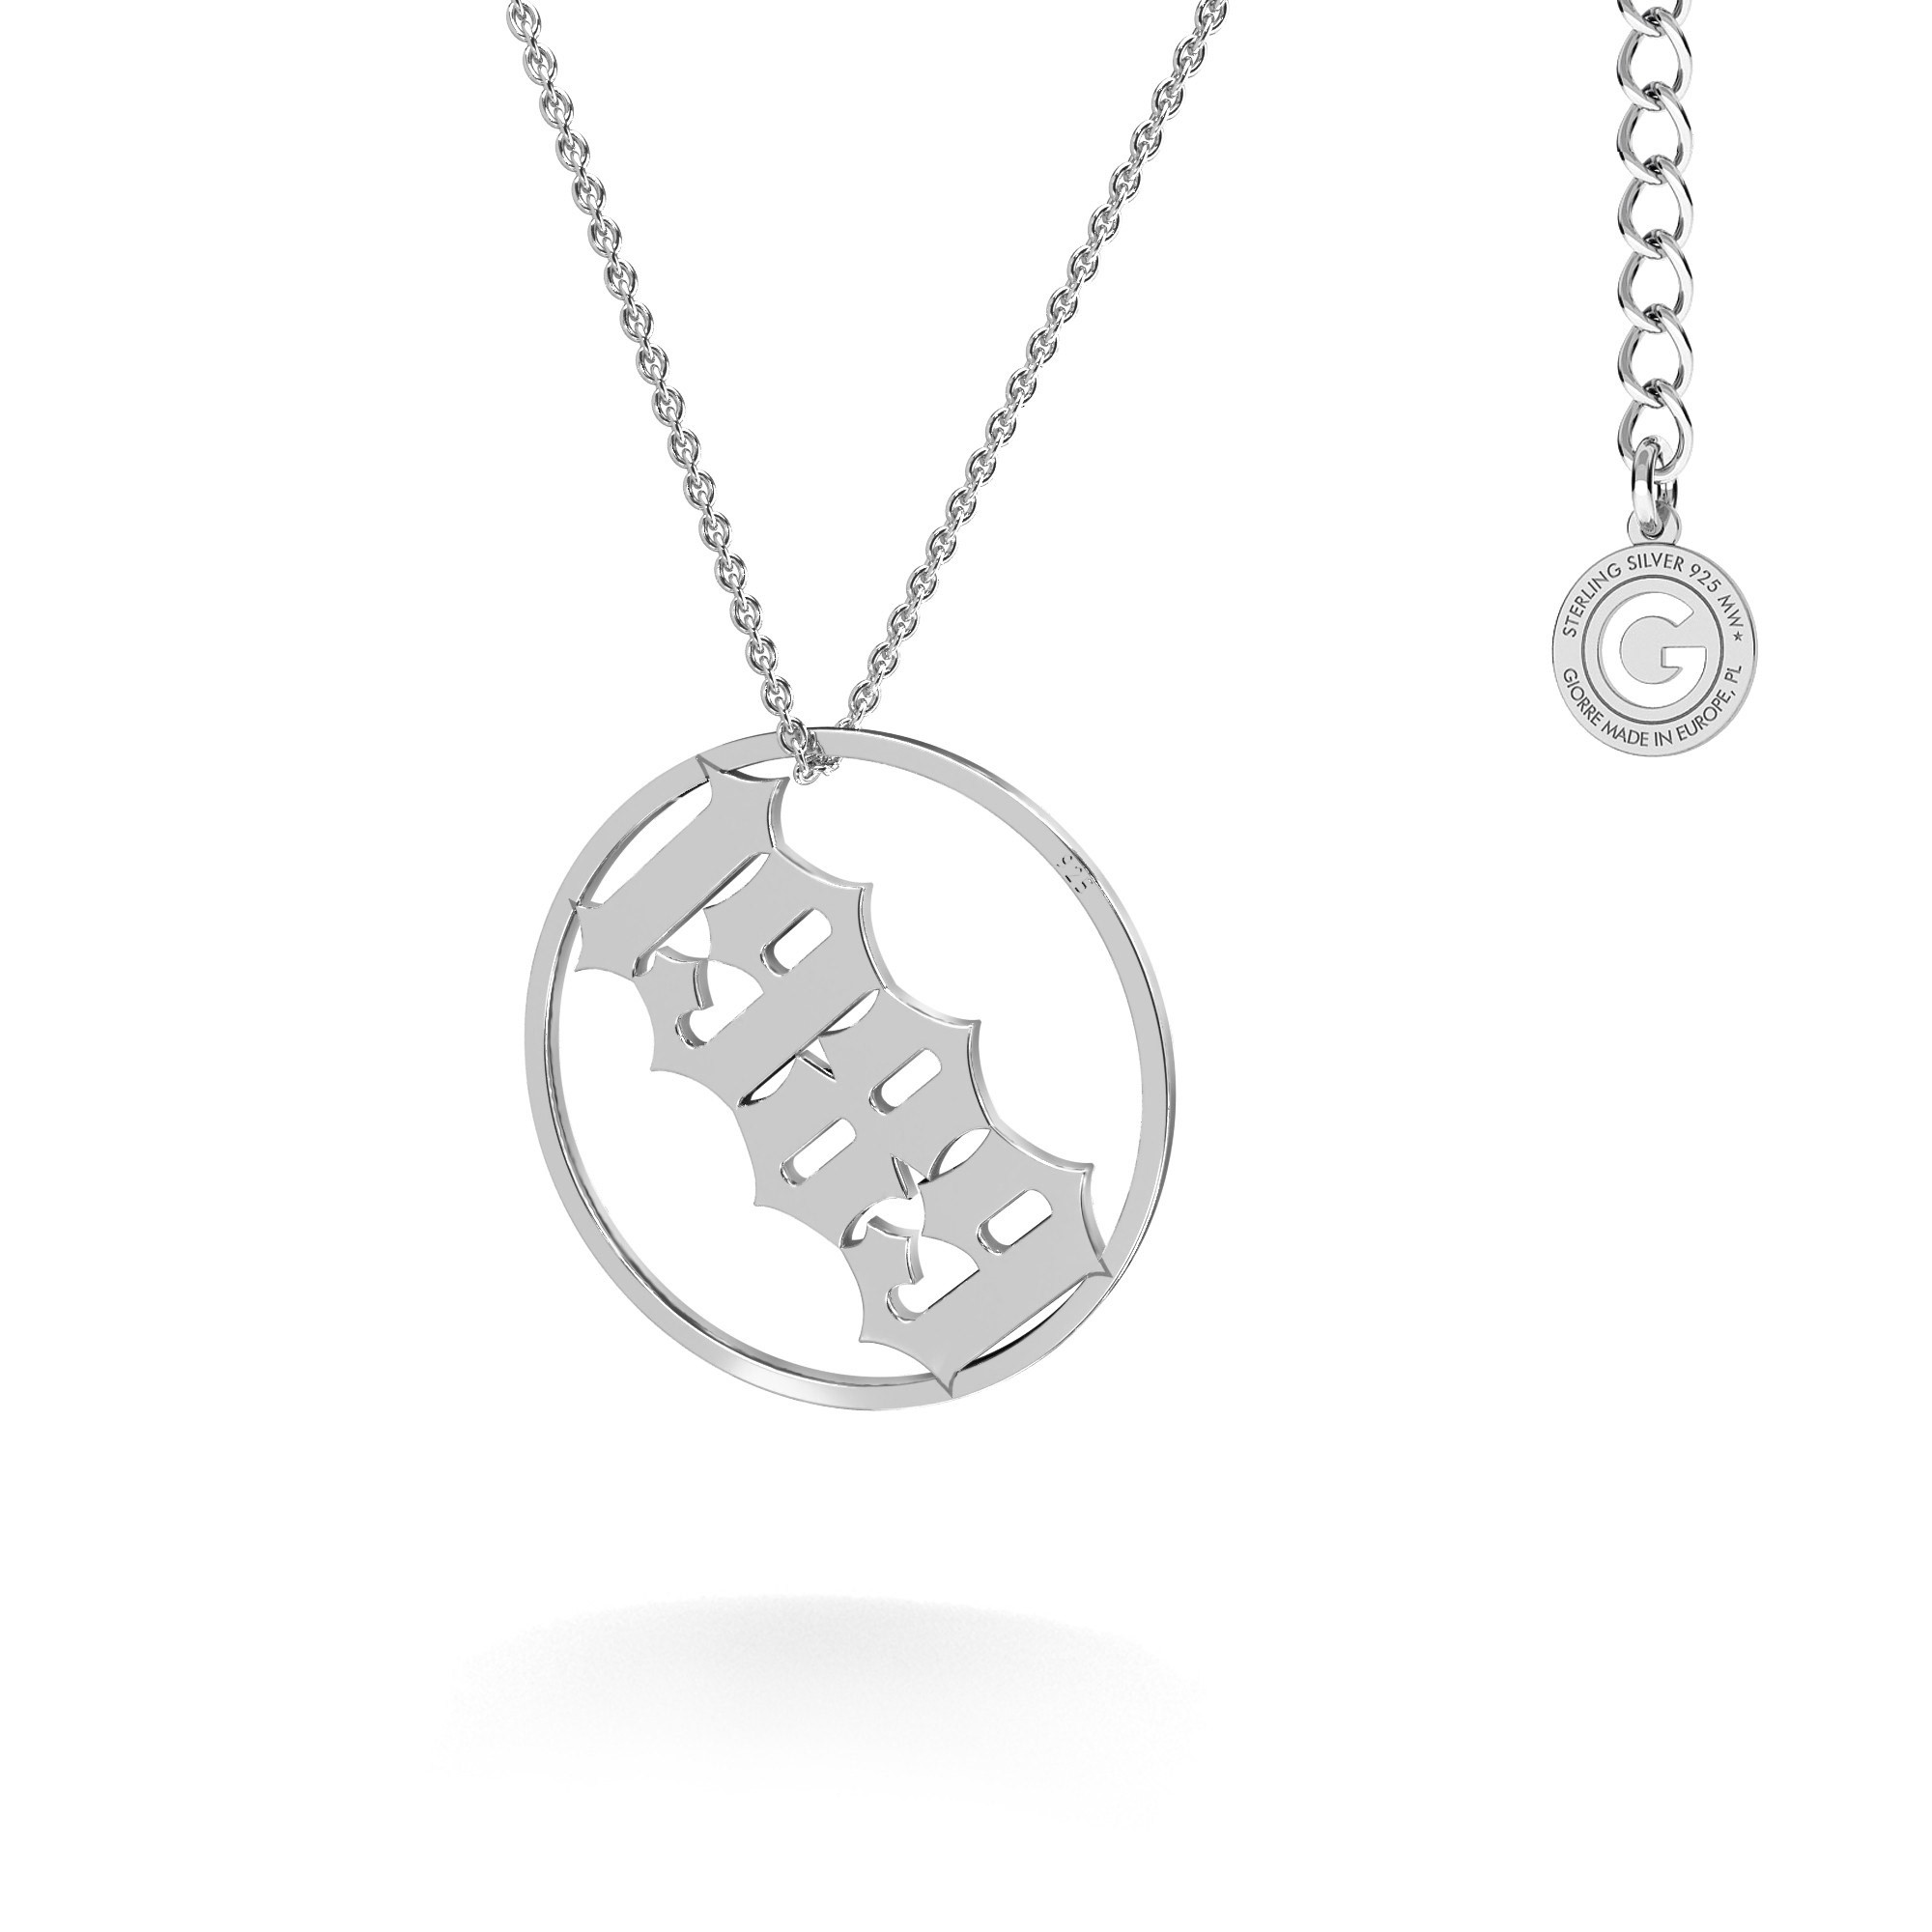 T°ra'vel'' Necklace - Tree, silver 925